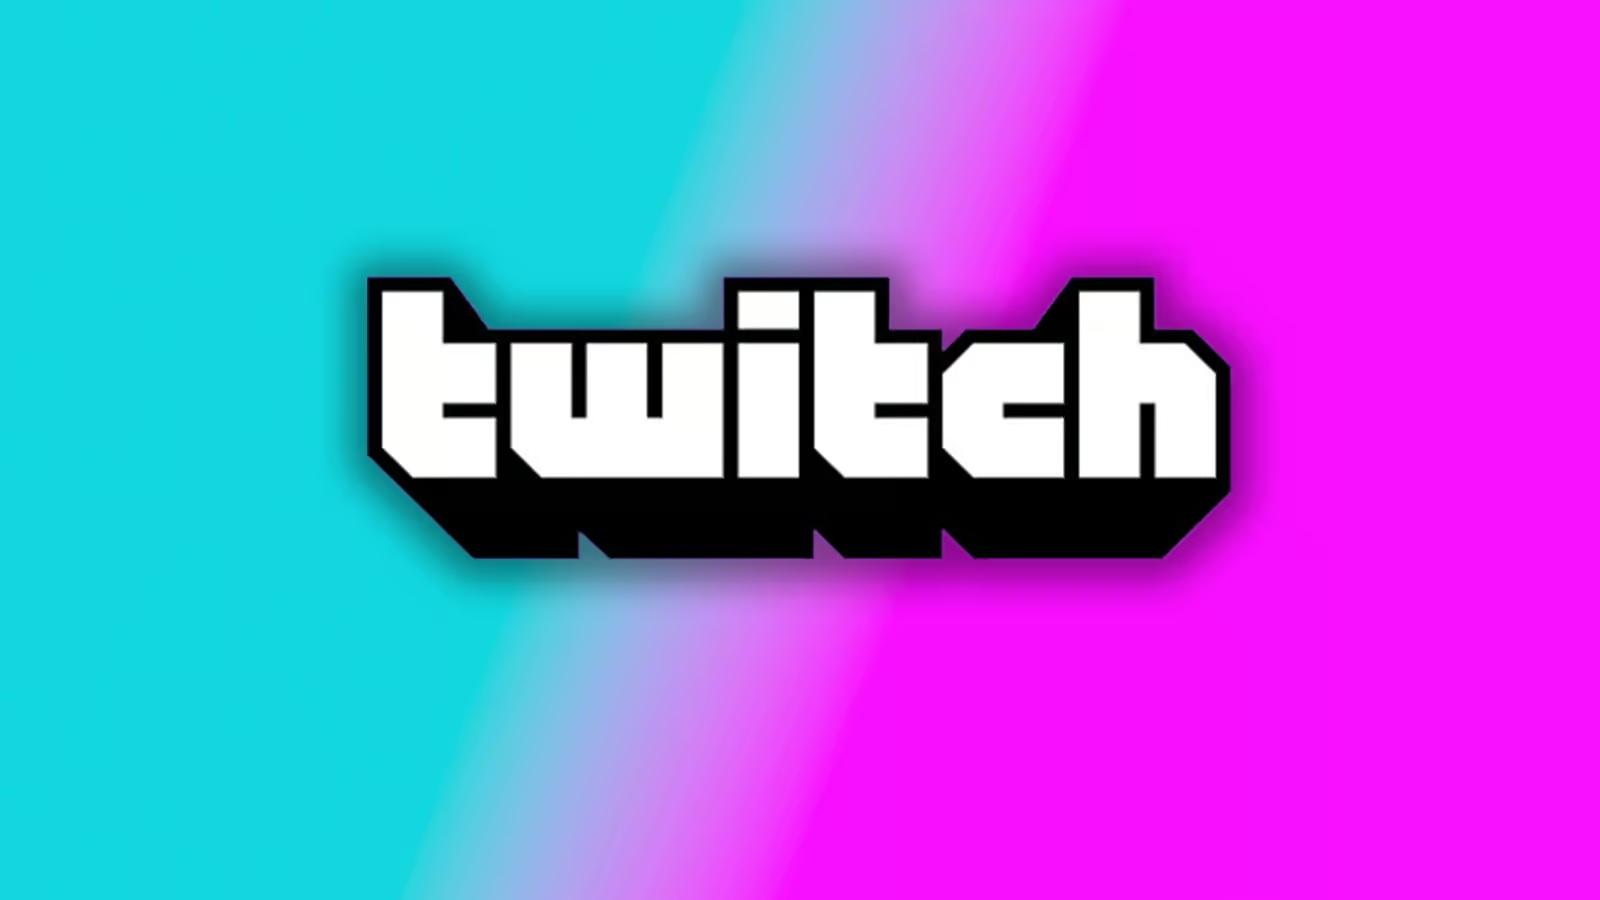 twitch logo on blue and purple background